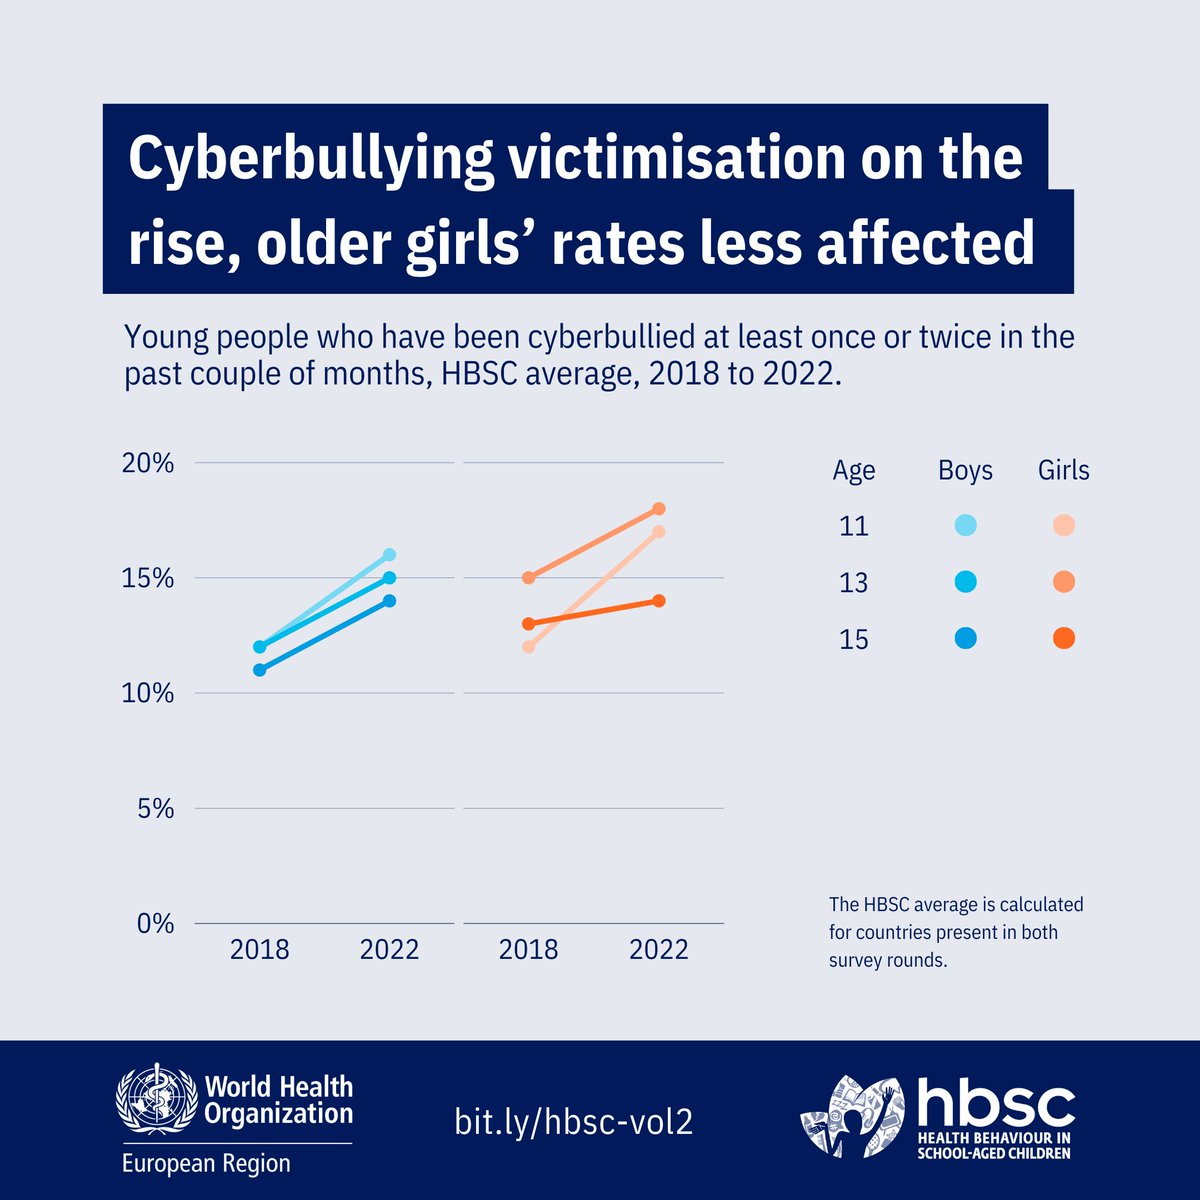 Cyberbullying victimisation is rising for most adolescents. Let's create adaptable online safety solutions to protect young people. #AdolescentHealth bit.ly/hbsc-vol2